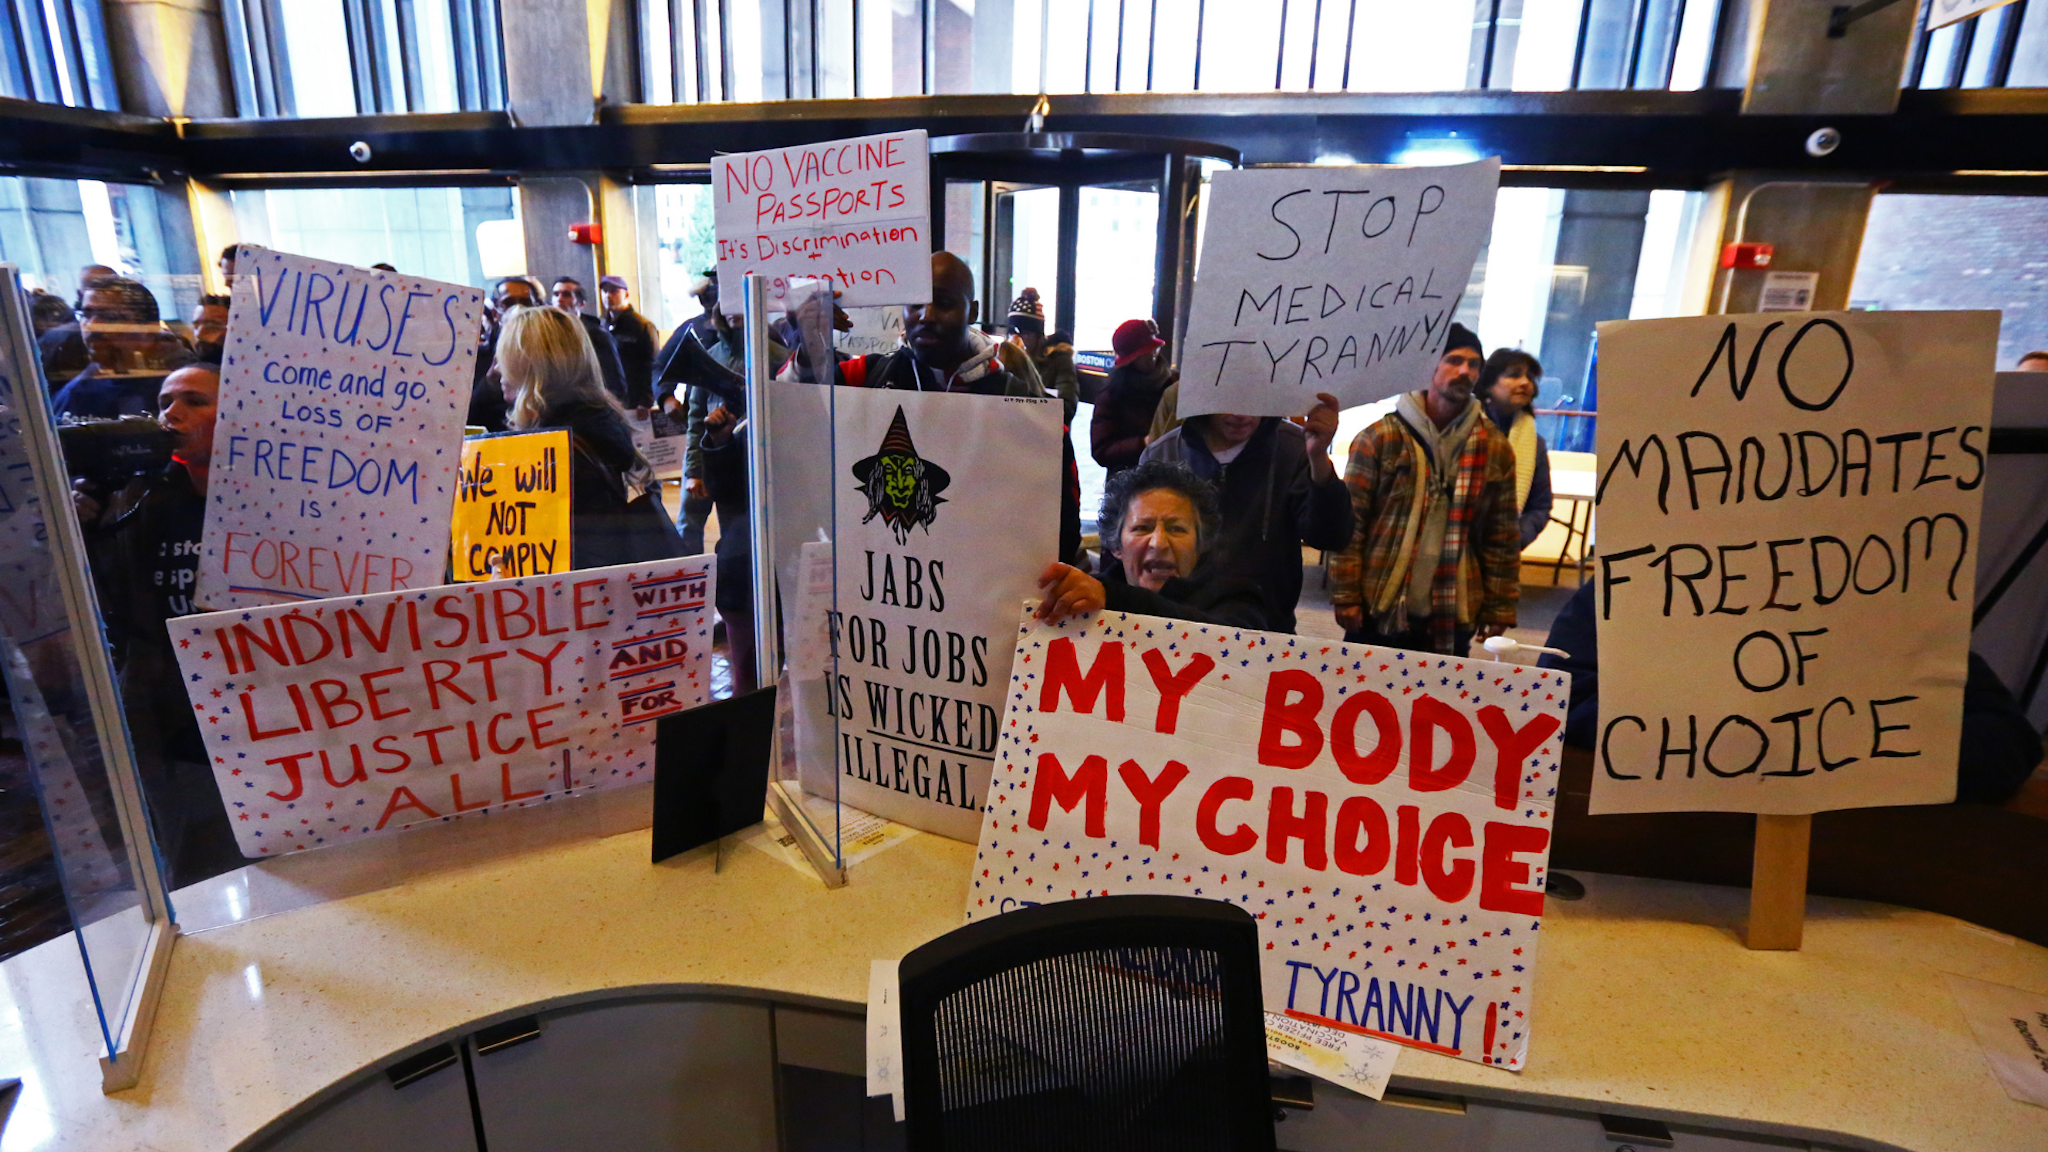 Protesters hold signs reading my body my choice, stop medical tyranny, and more, at Boston City Hall.